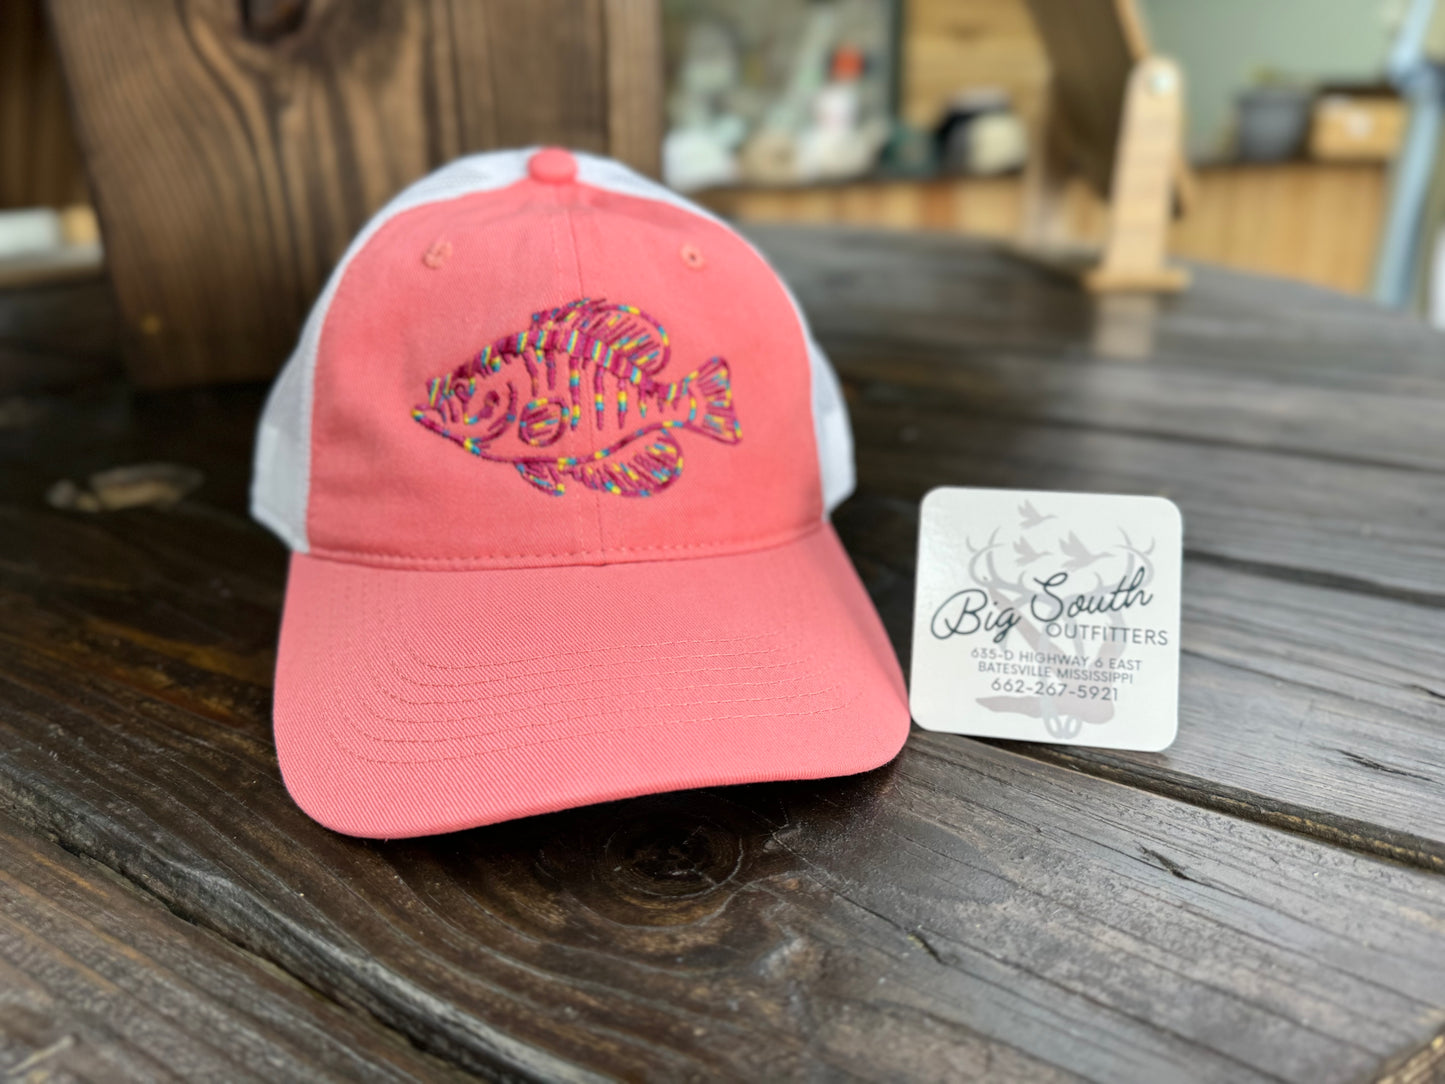 Outdoor Cap FWT-130 Melon/White with Crappie